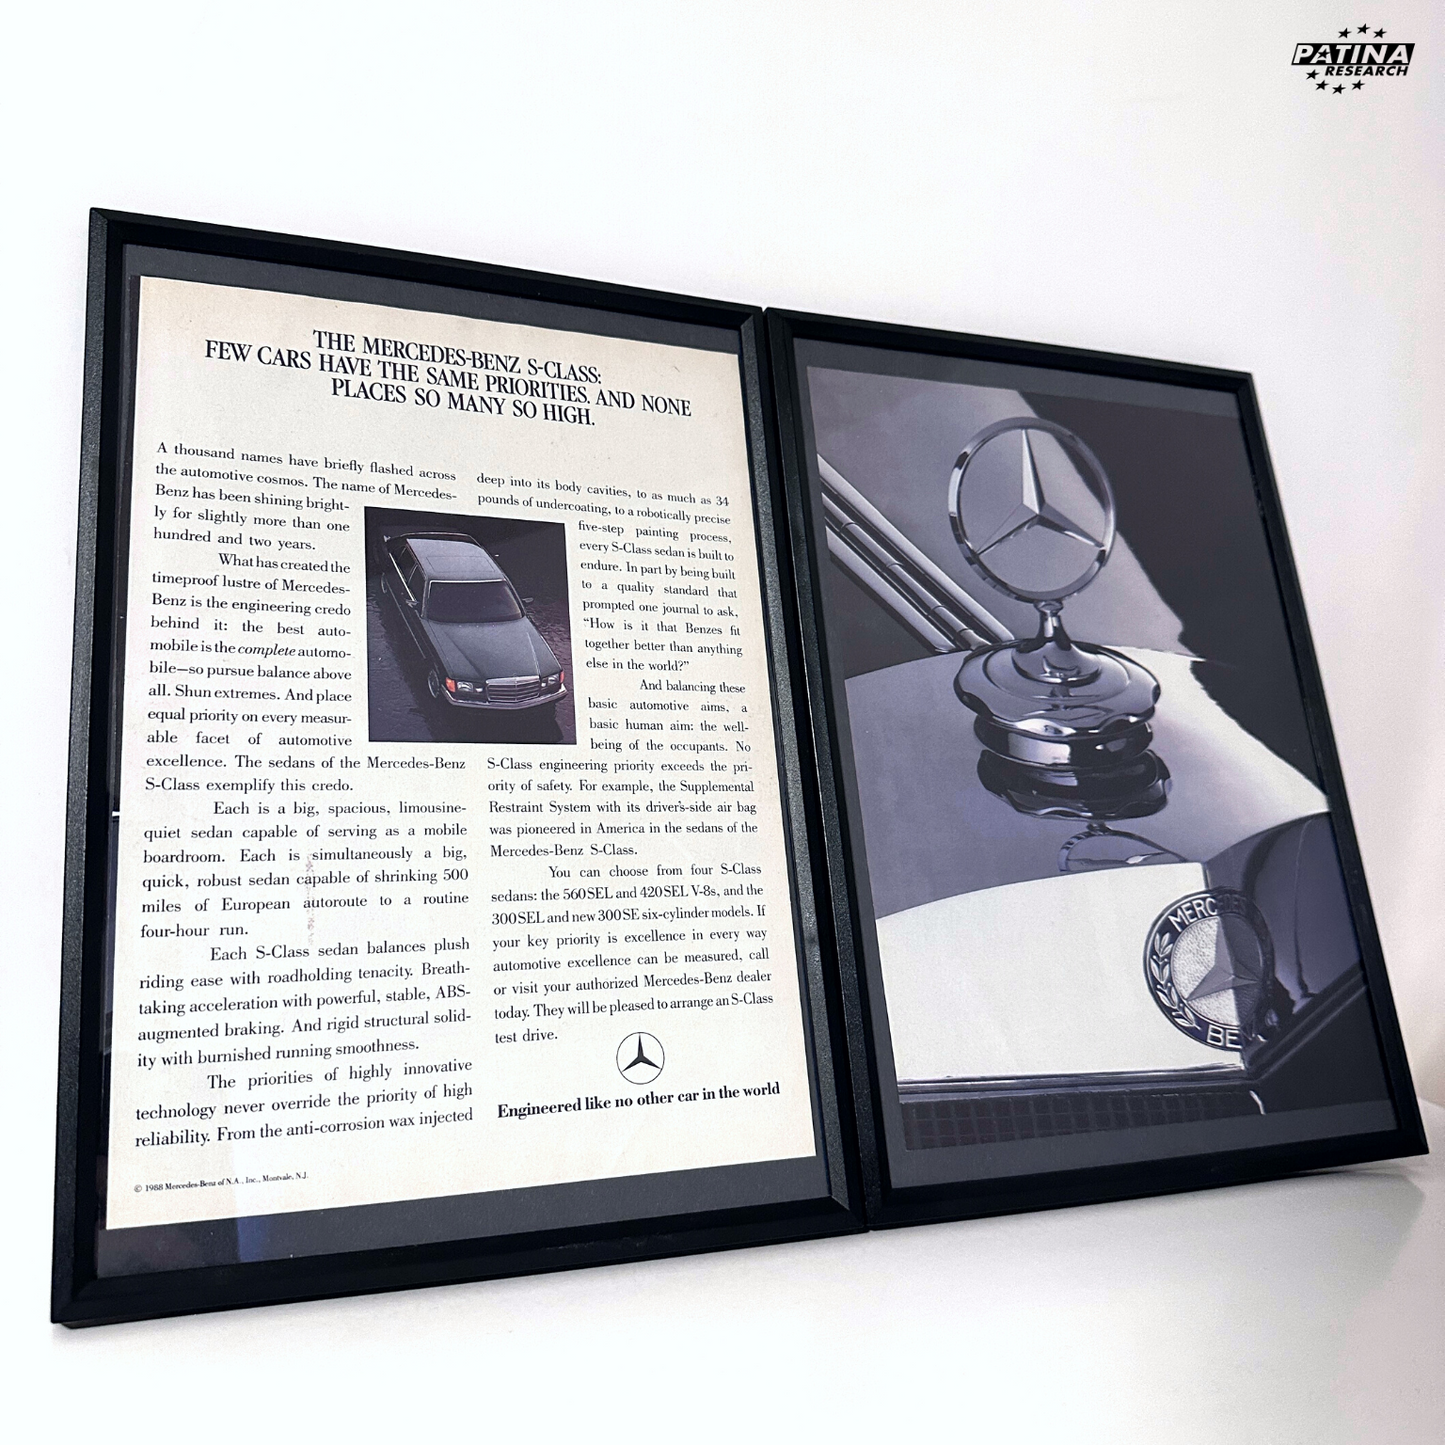 The Mercedes benz S class w126 framed ad